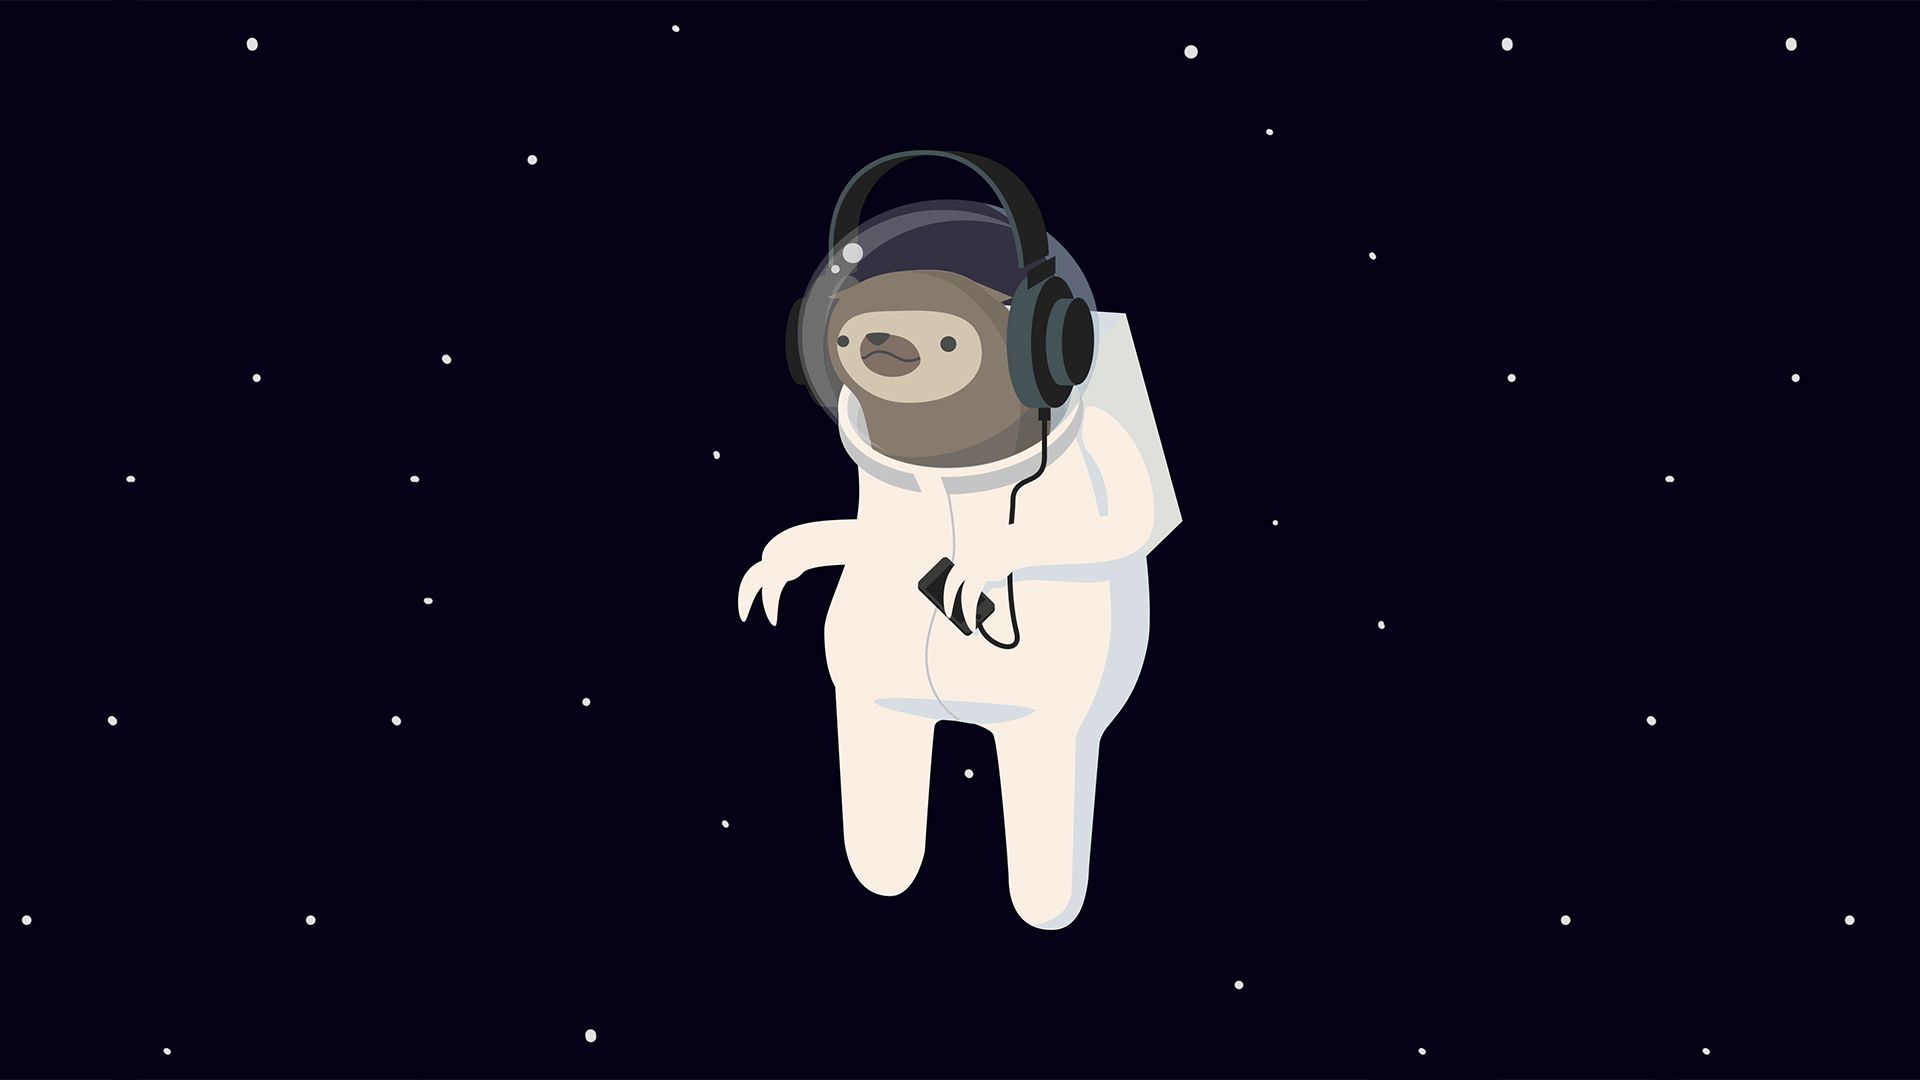 Space Sloth In 2019 .com